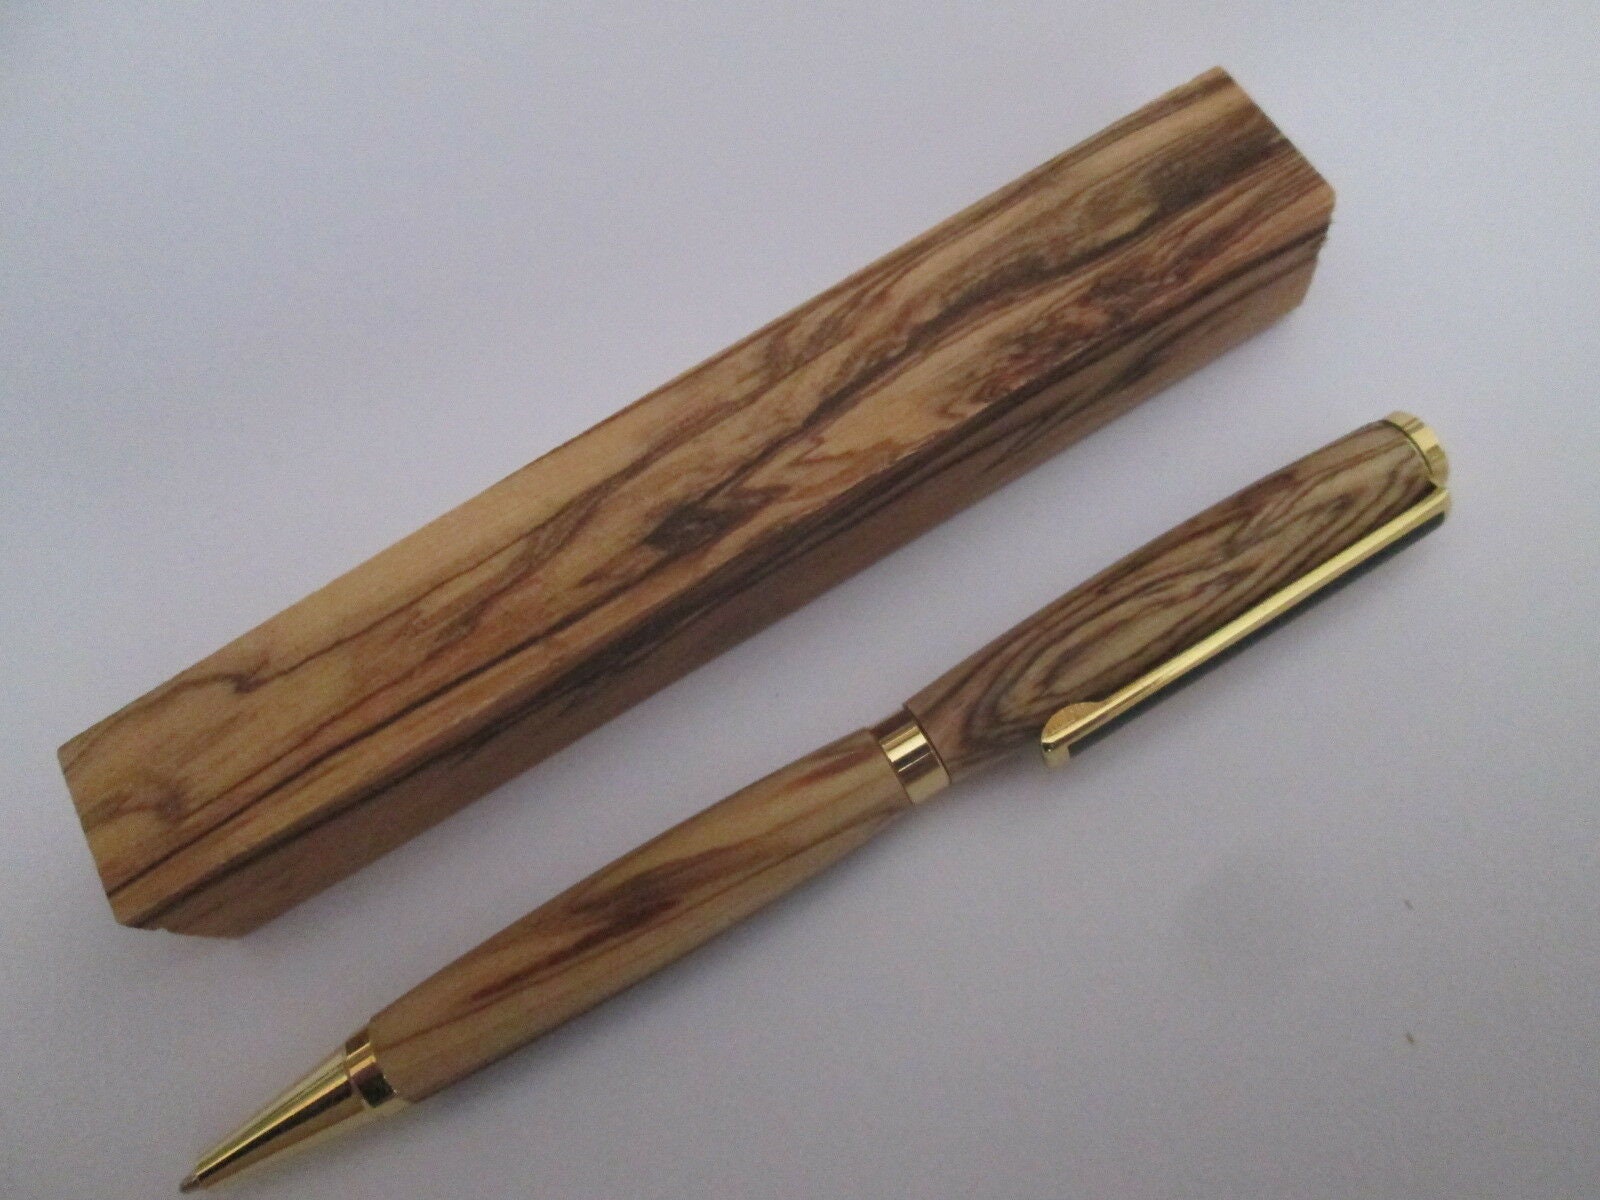 Pen Handmade Rollerball Writing Olive Wood Pens Wood Gatsby See Video 1275a